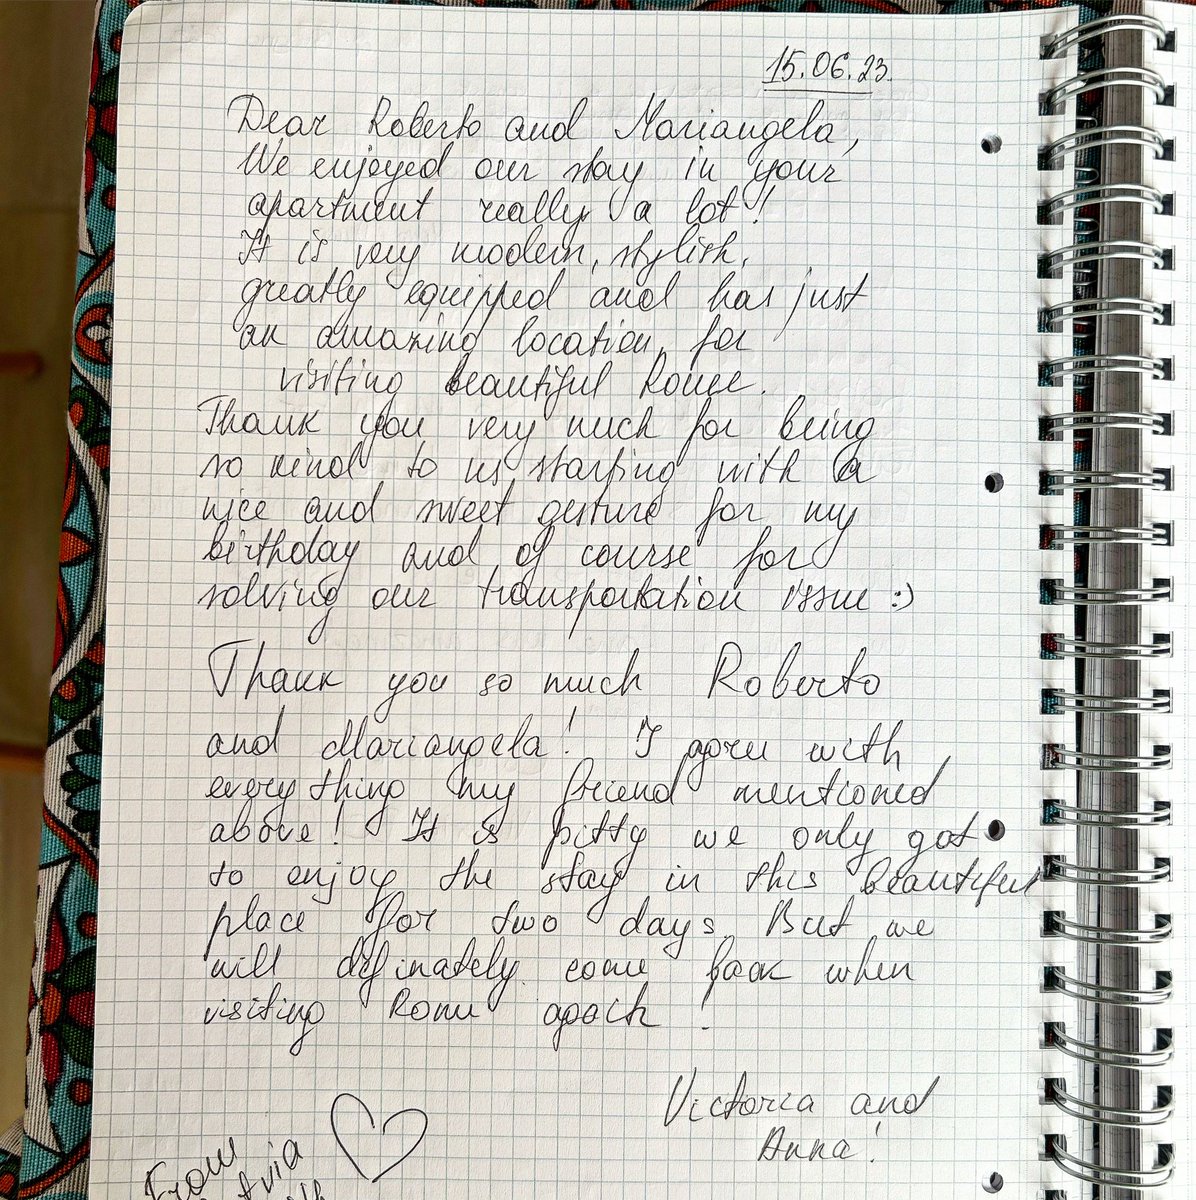 Happy guests from 🇱🇻 and 🇦🇲 

“Dear Roberto and Mariangela,
we enjoyed our stay in your apartment really a lot!
It is very modern, stylish, greatly equipped ……
#pigneto54 #pigneto #airbnb #airbnblove #airbnbrome #airbnbitaly #happyguest #airbnbsuperhost #superhost